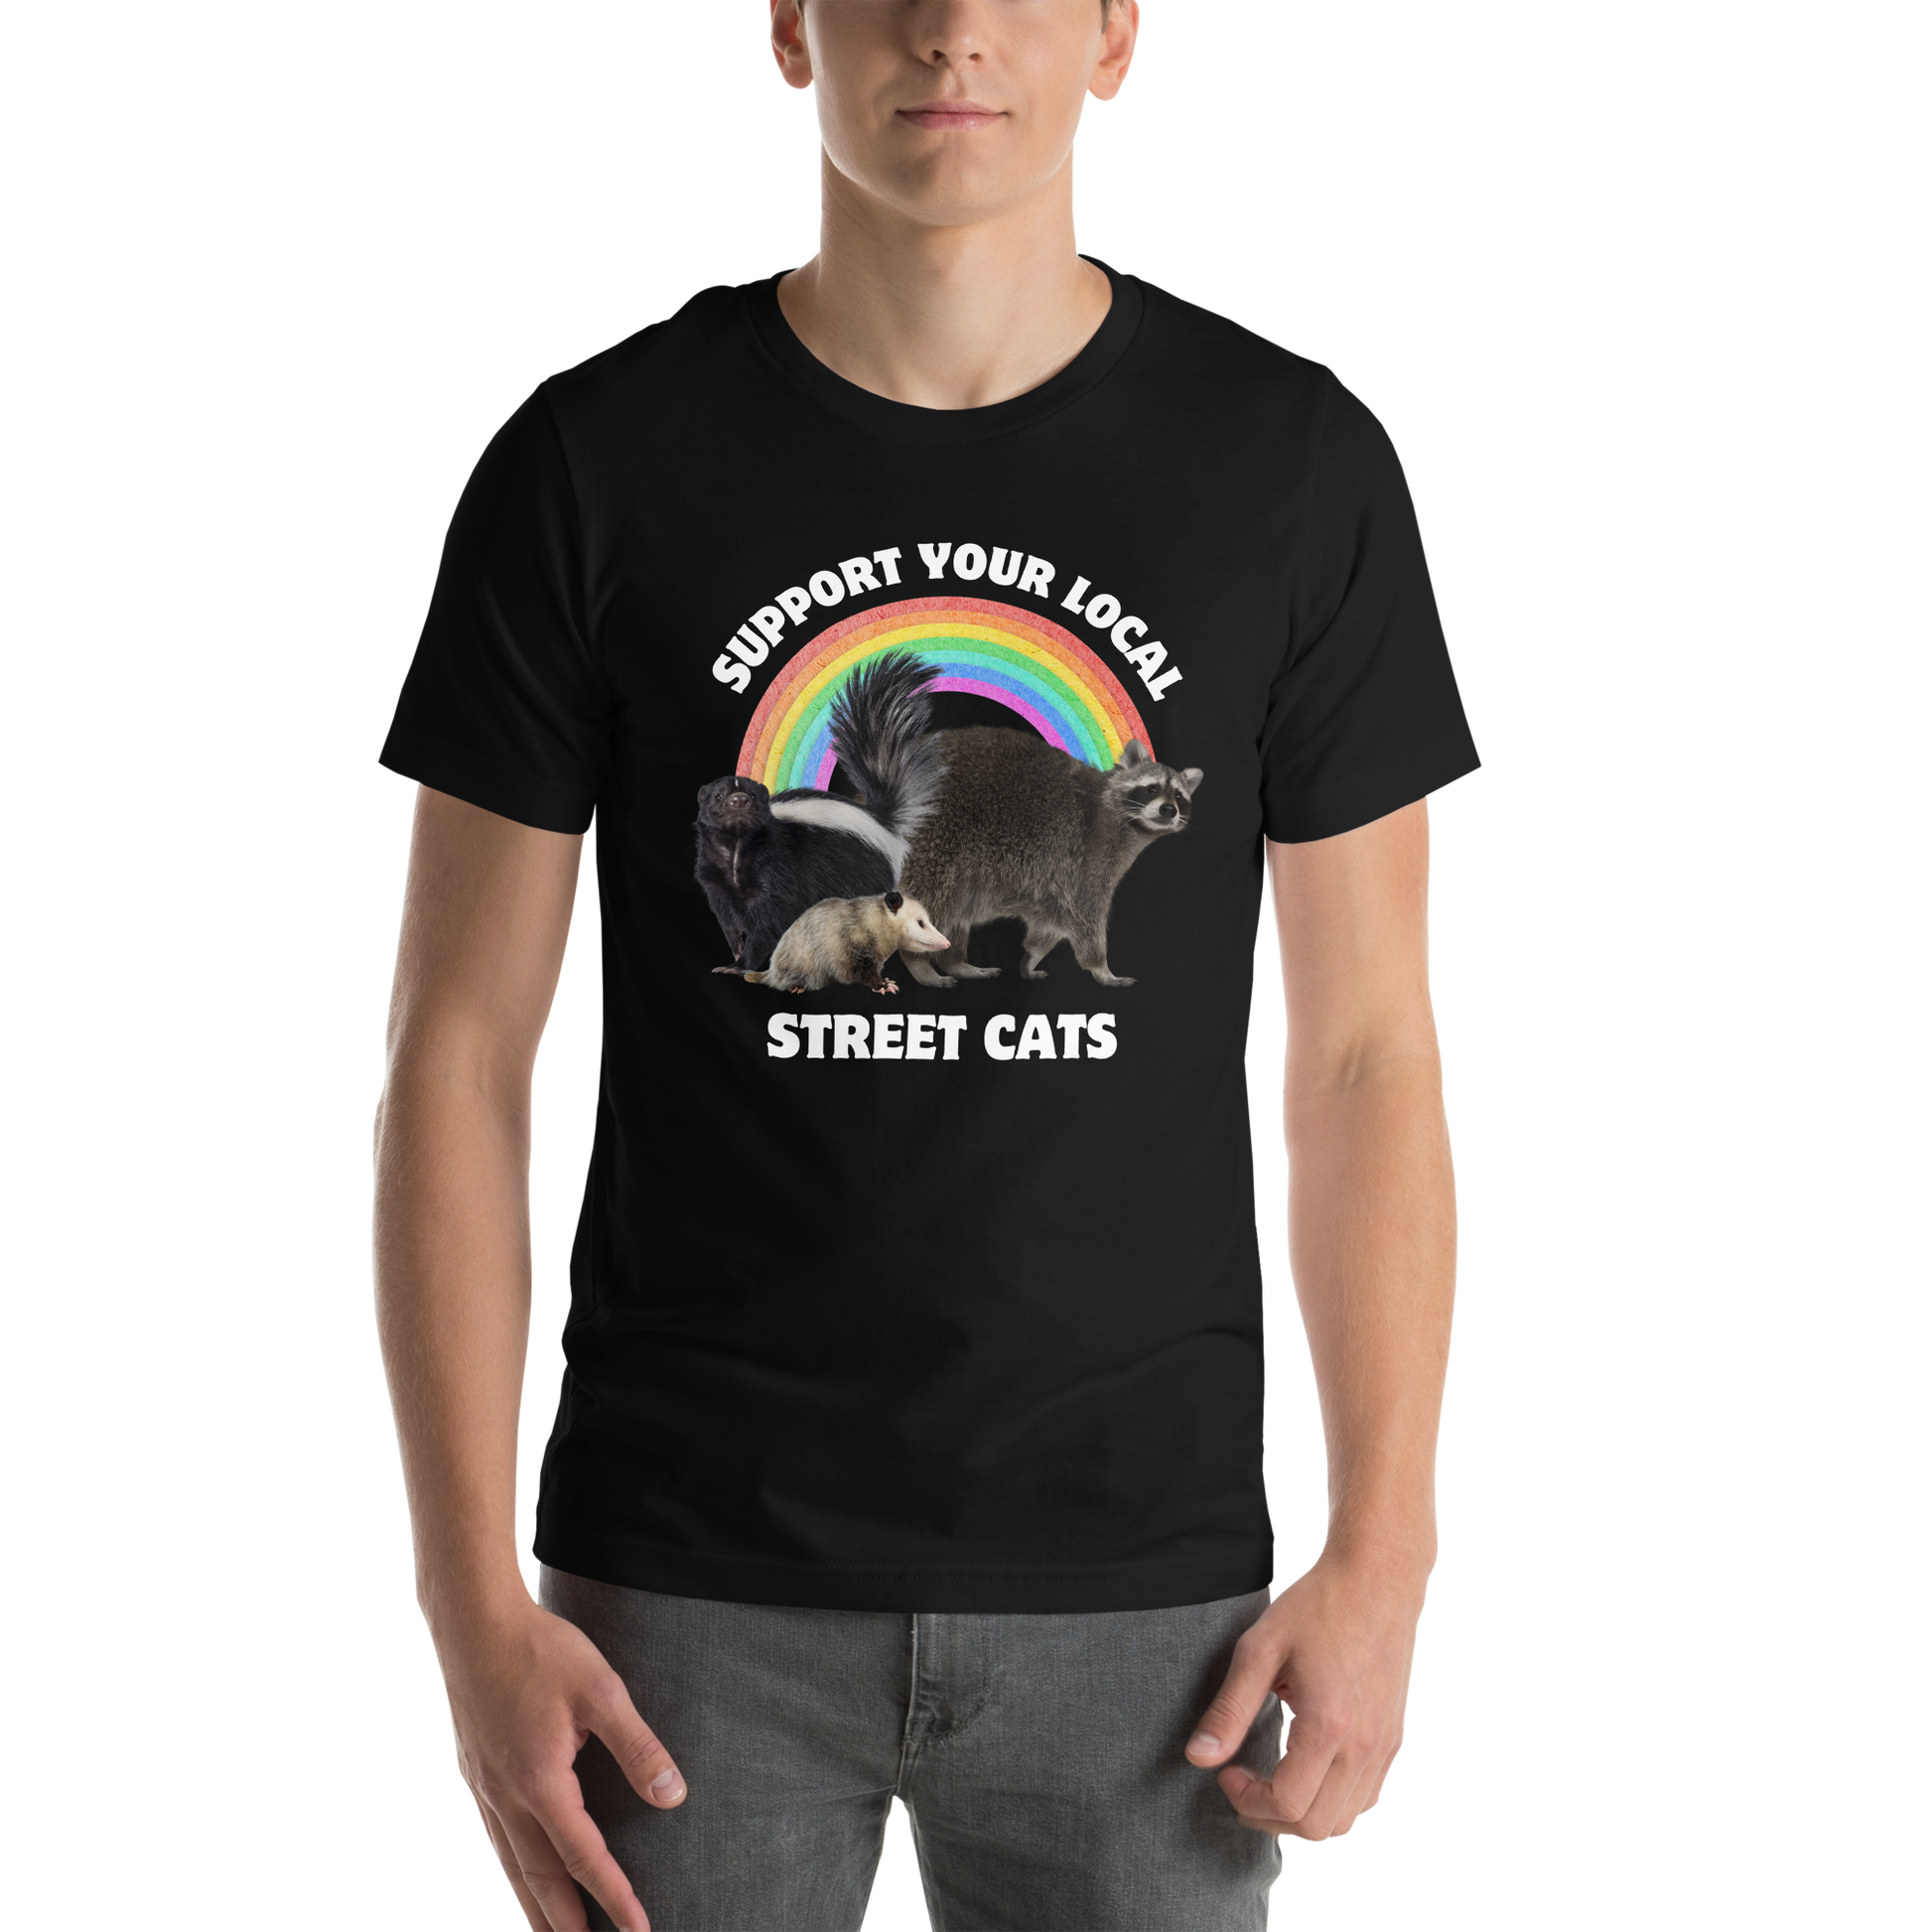 Man wearing a Black Premium Street Cats Tee featuring a funny 'Support Your Local Street Cats' graphic on the chest - Funny Graphic Animal Tees - Boozy Fox